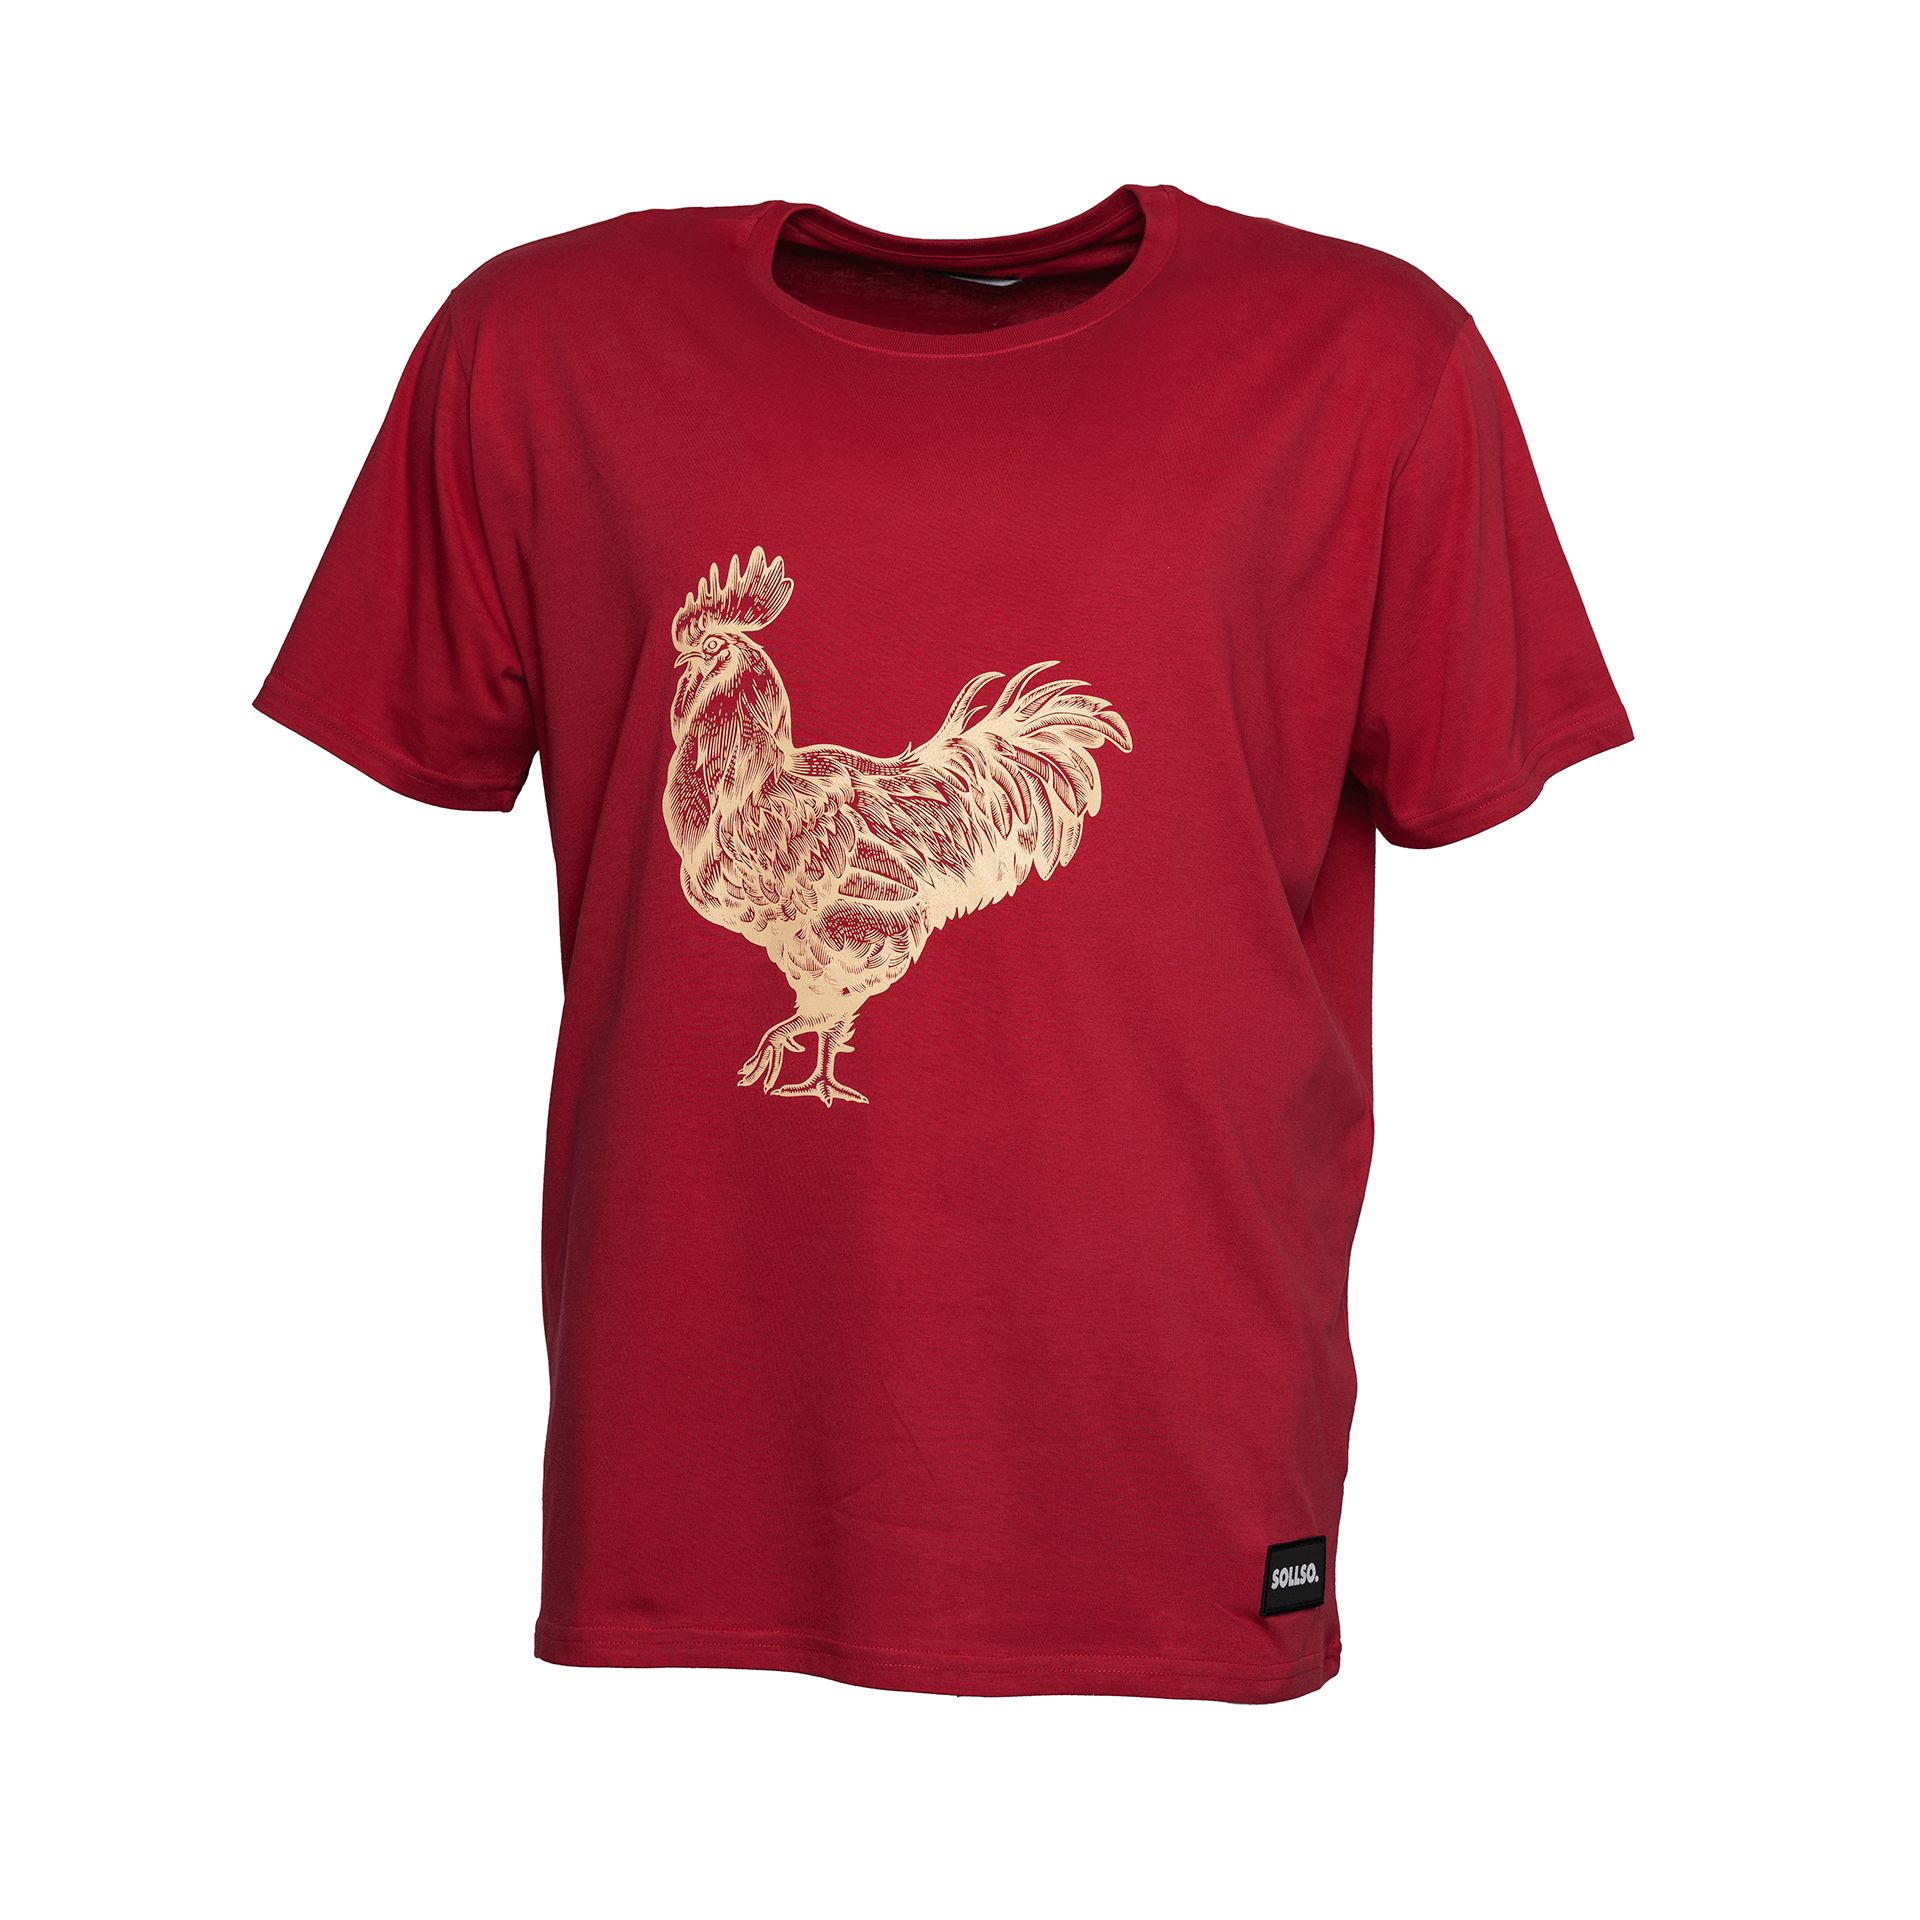 SOLLSO. T-Shirt "Rooster", Farbe Ginger Red, Größe 6XL